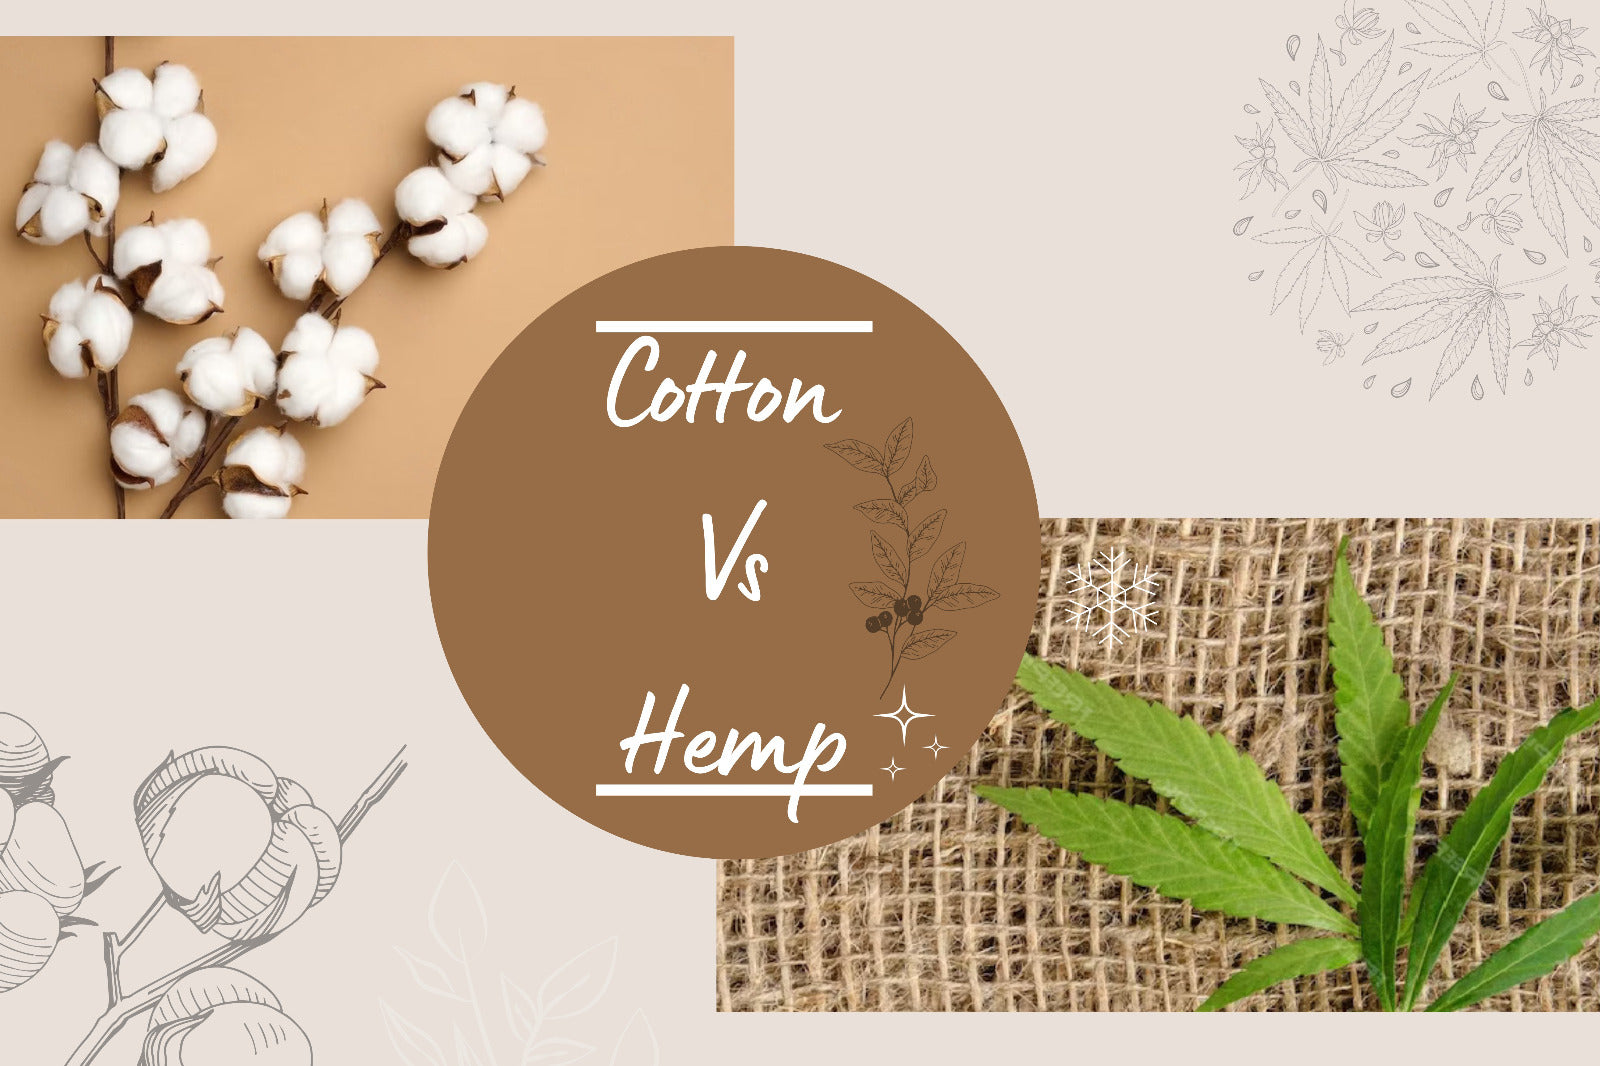 Level Up Your Fashion with Hemp Clothing and Eco-Friendly T shirts